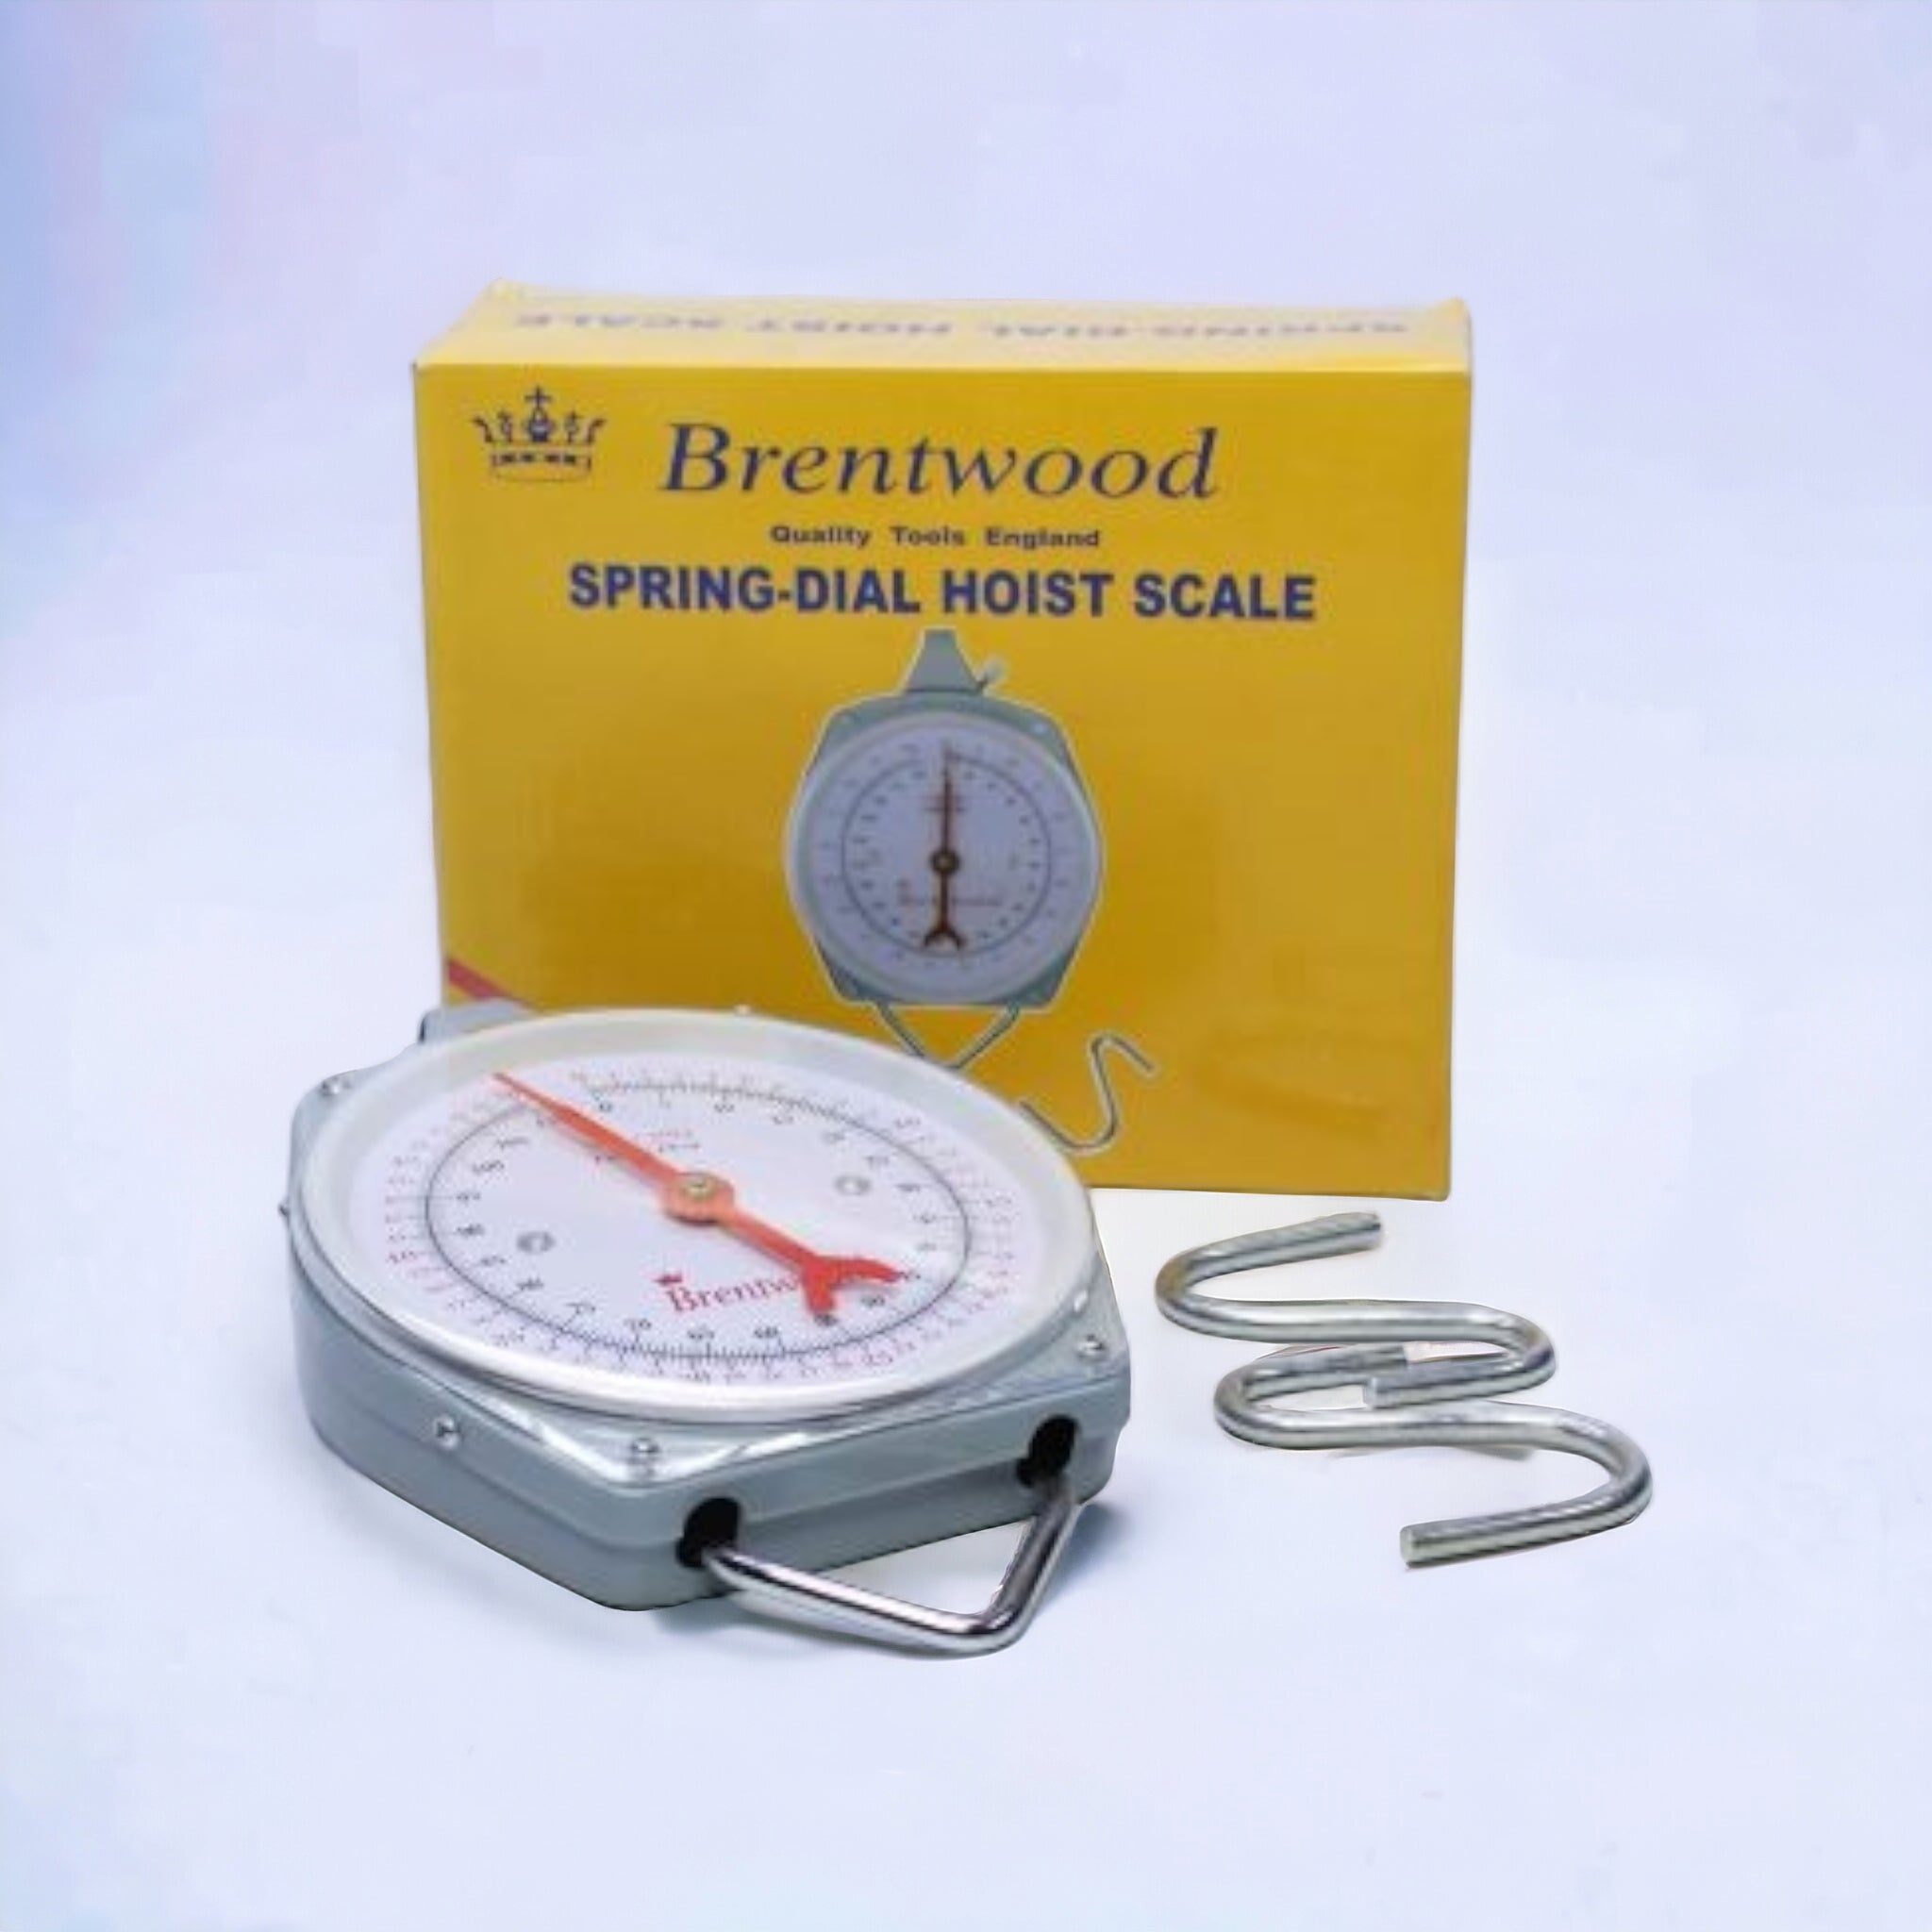 Brentwood Spring Dial Hoist Scale